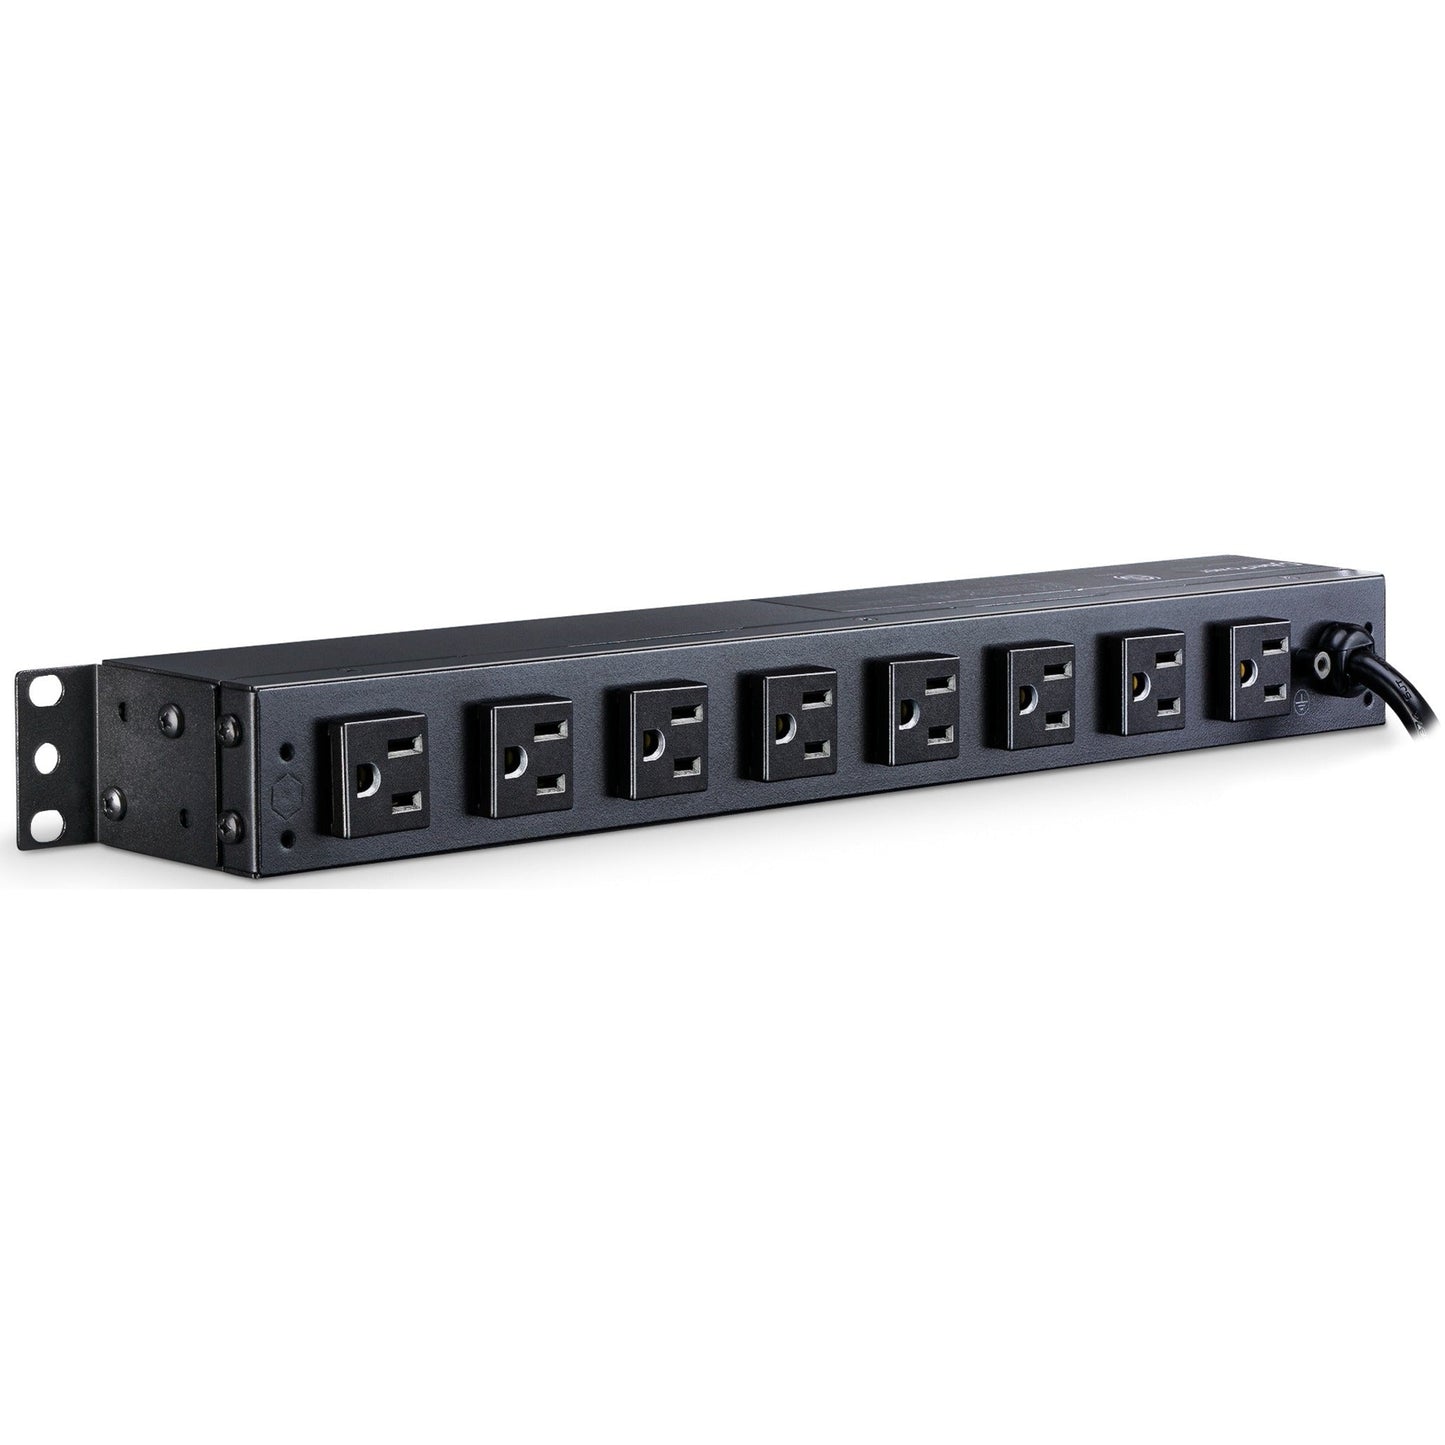 CyberPower RKBS15S2F8R Rackbar 10 - Outlet Surge with 3600 J